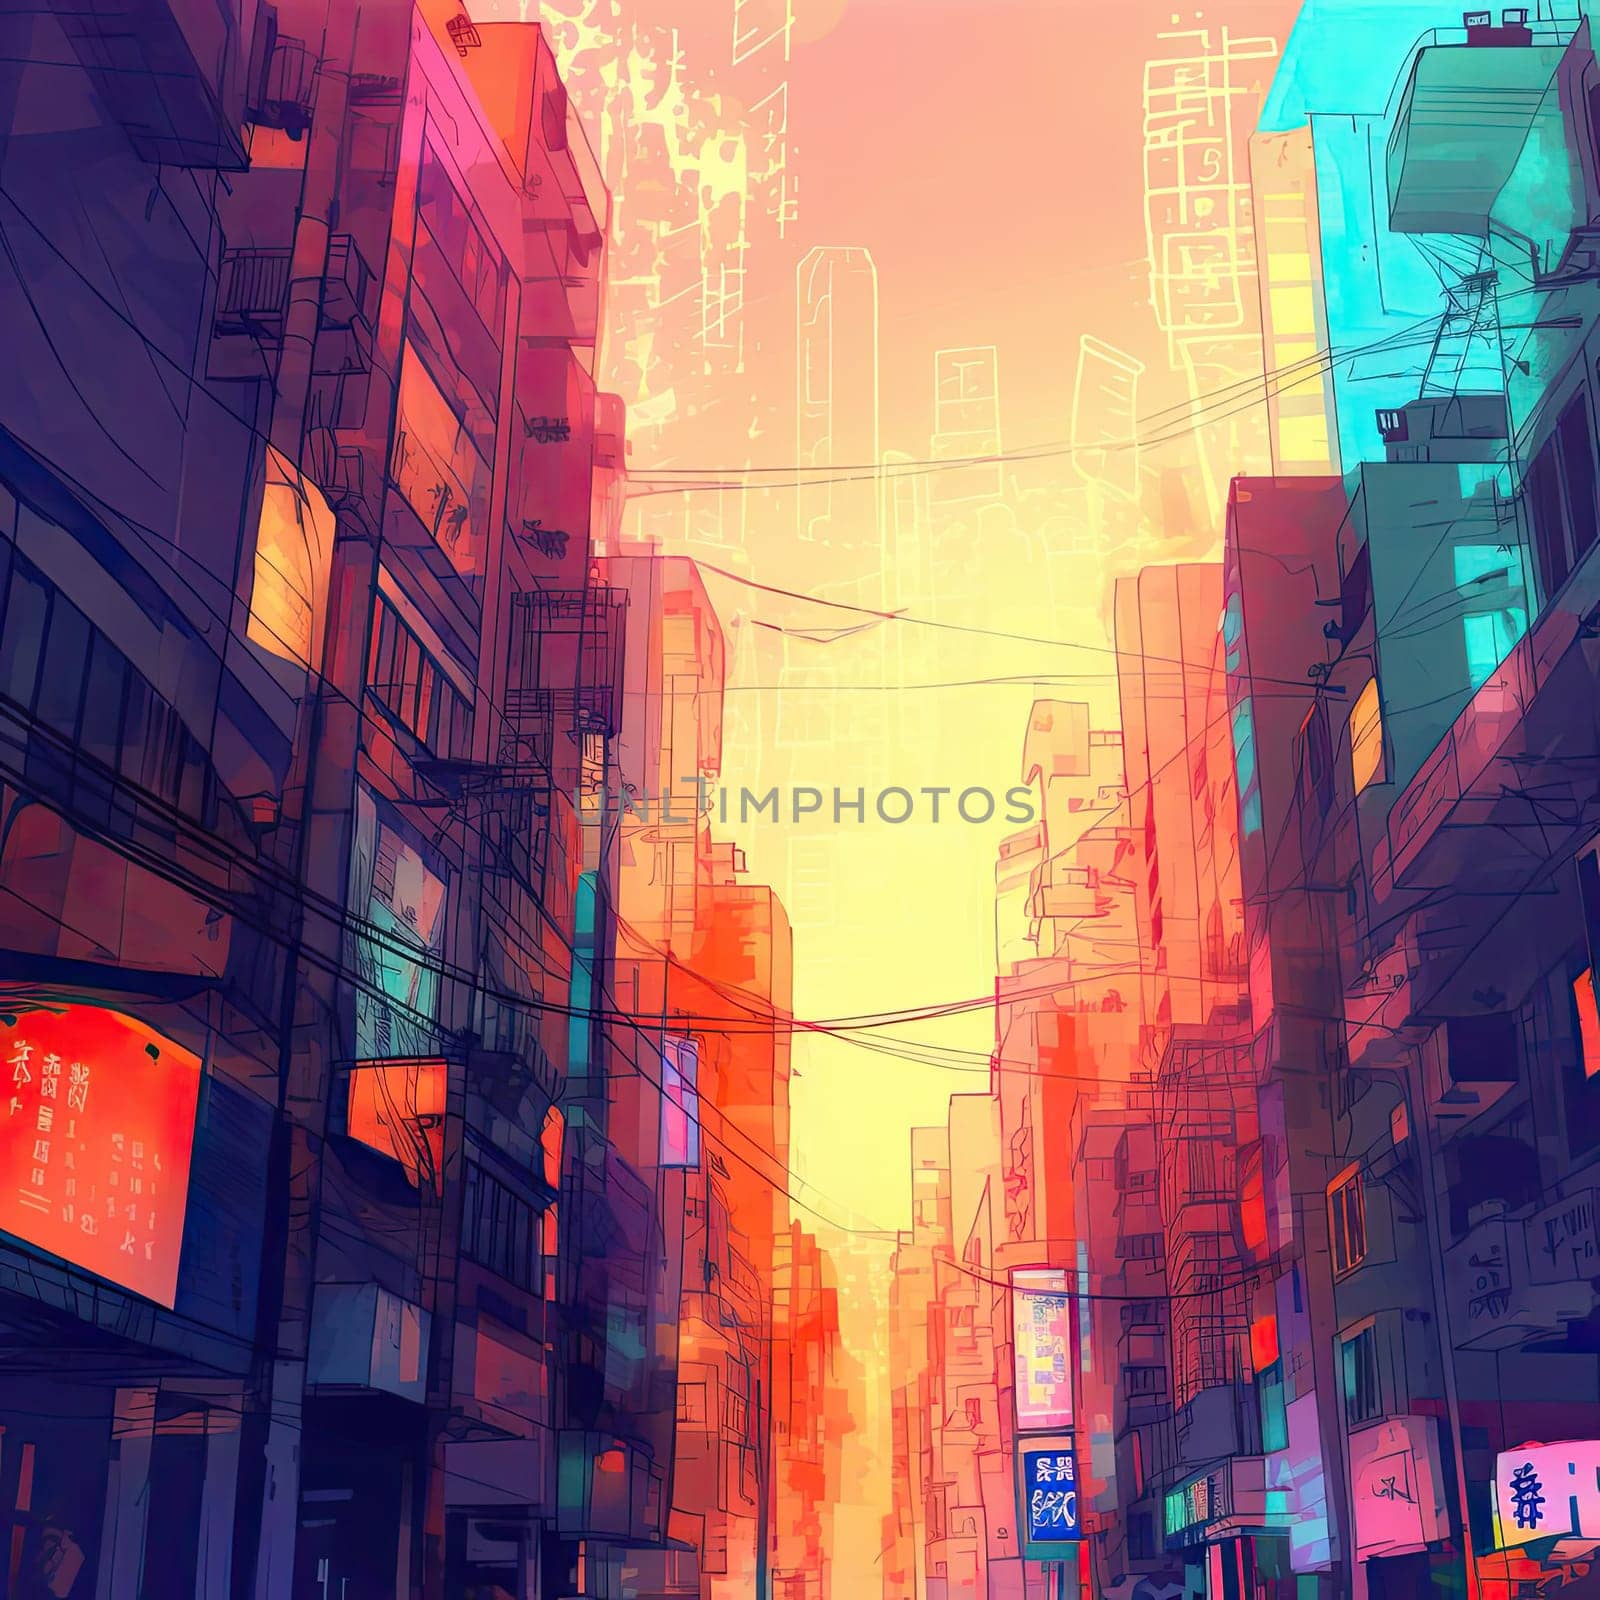 Digital illustration of a street in the city at sunset (ID: 001692)